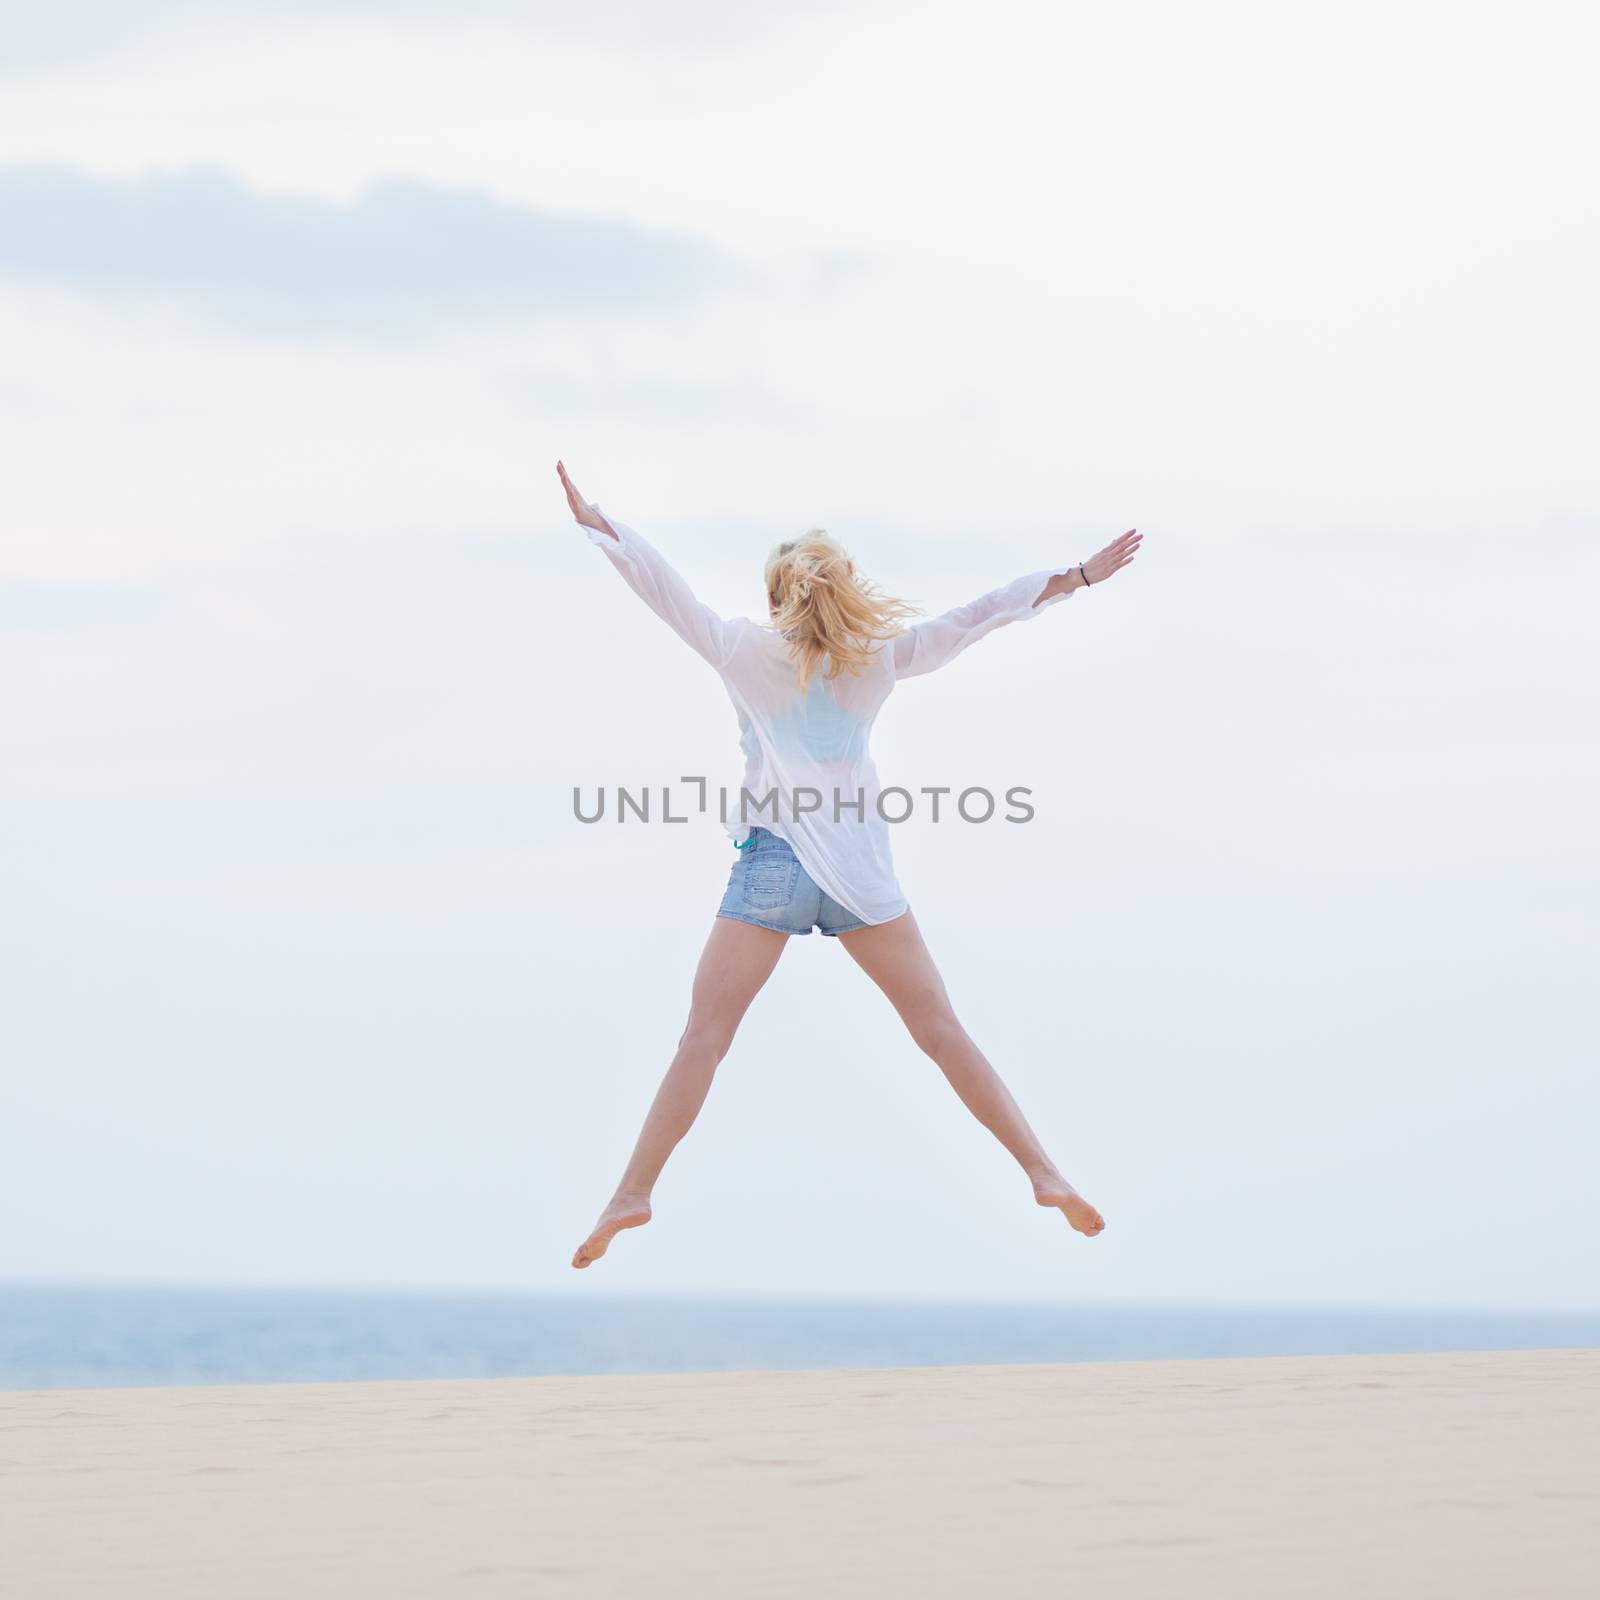 Relaxed woman enjoying freedom, feeling happy. Serene relaxing woman in pure happiness and elated enjoyment, jumping with arms outstretched up. Copy space for text.